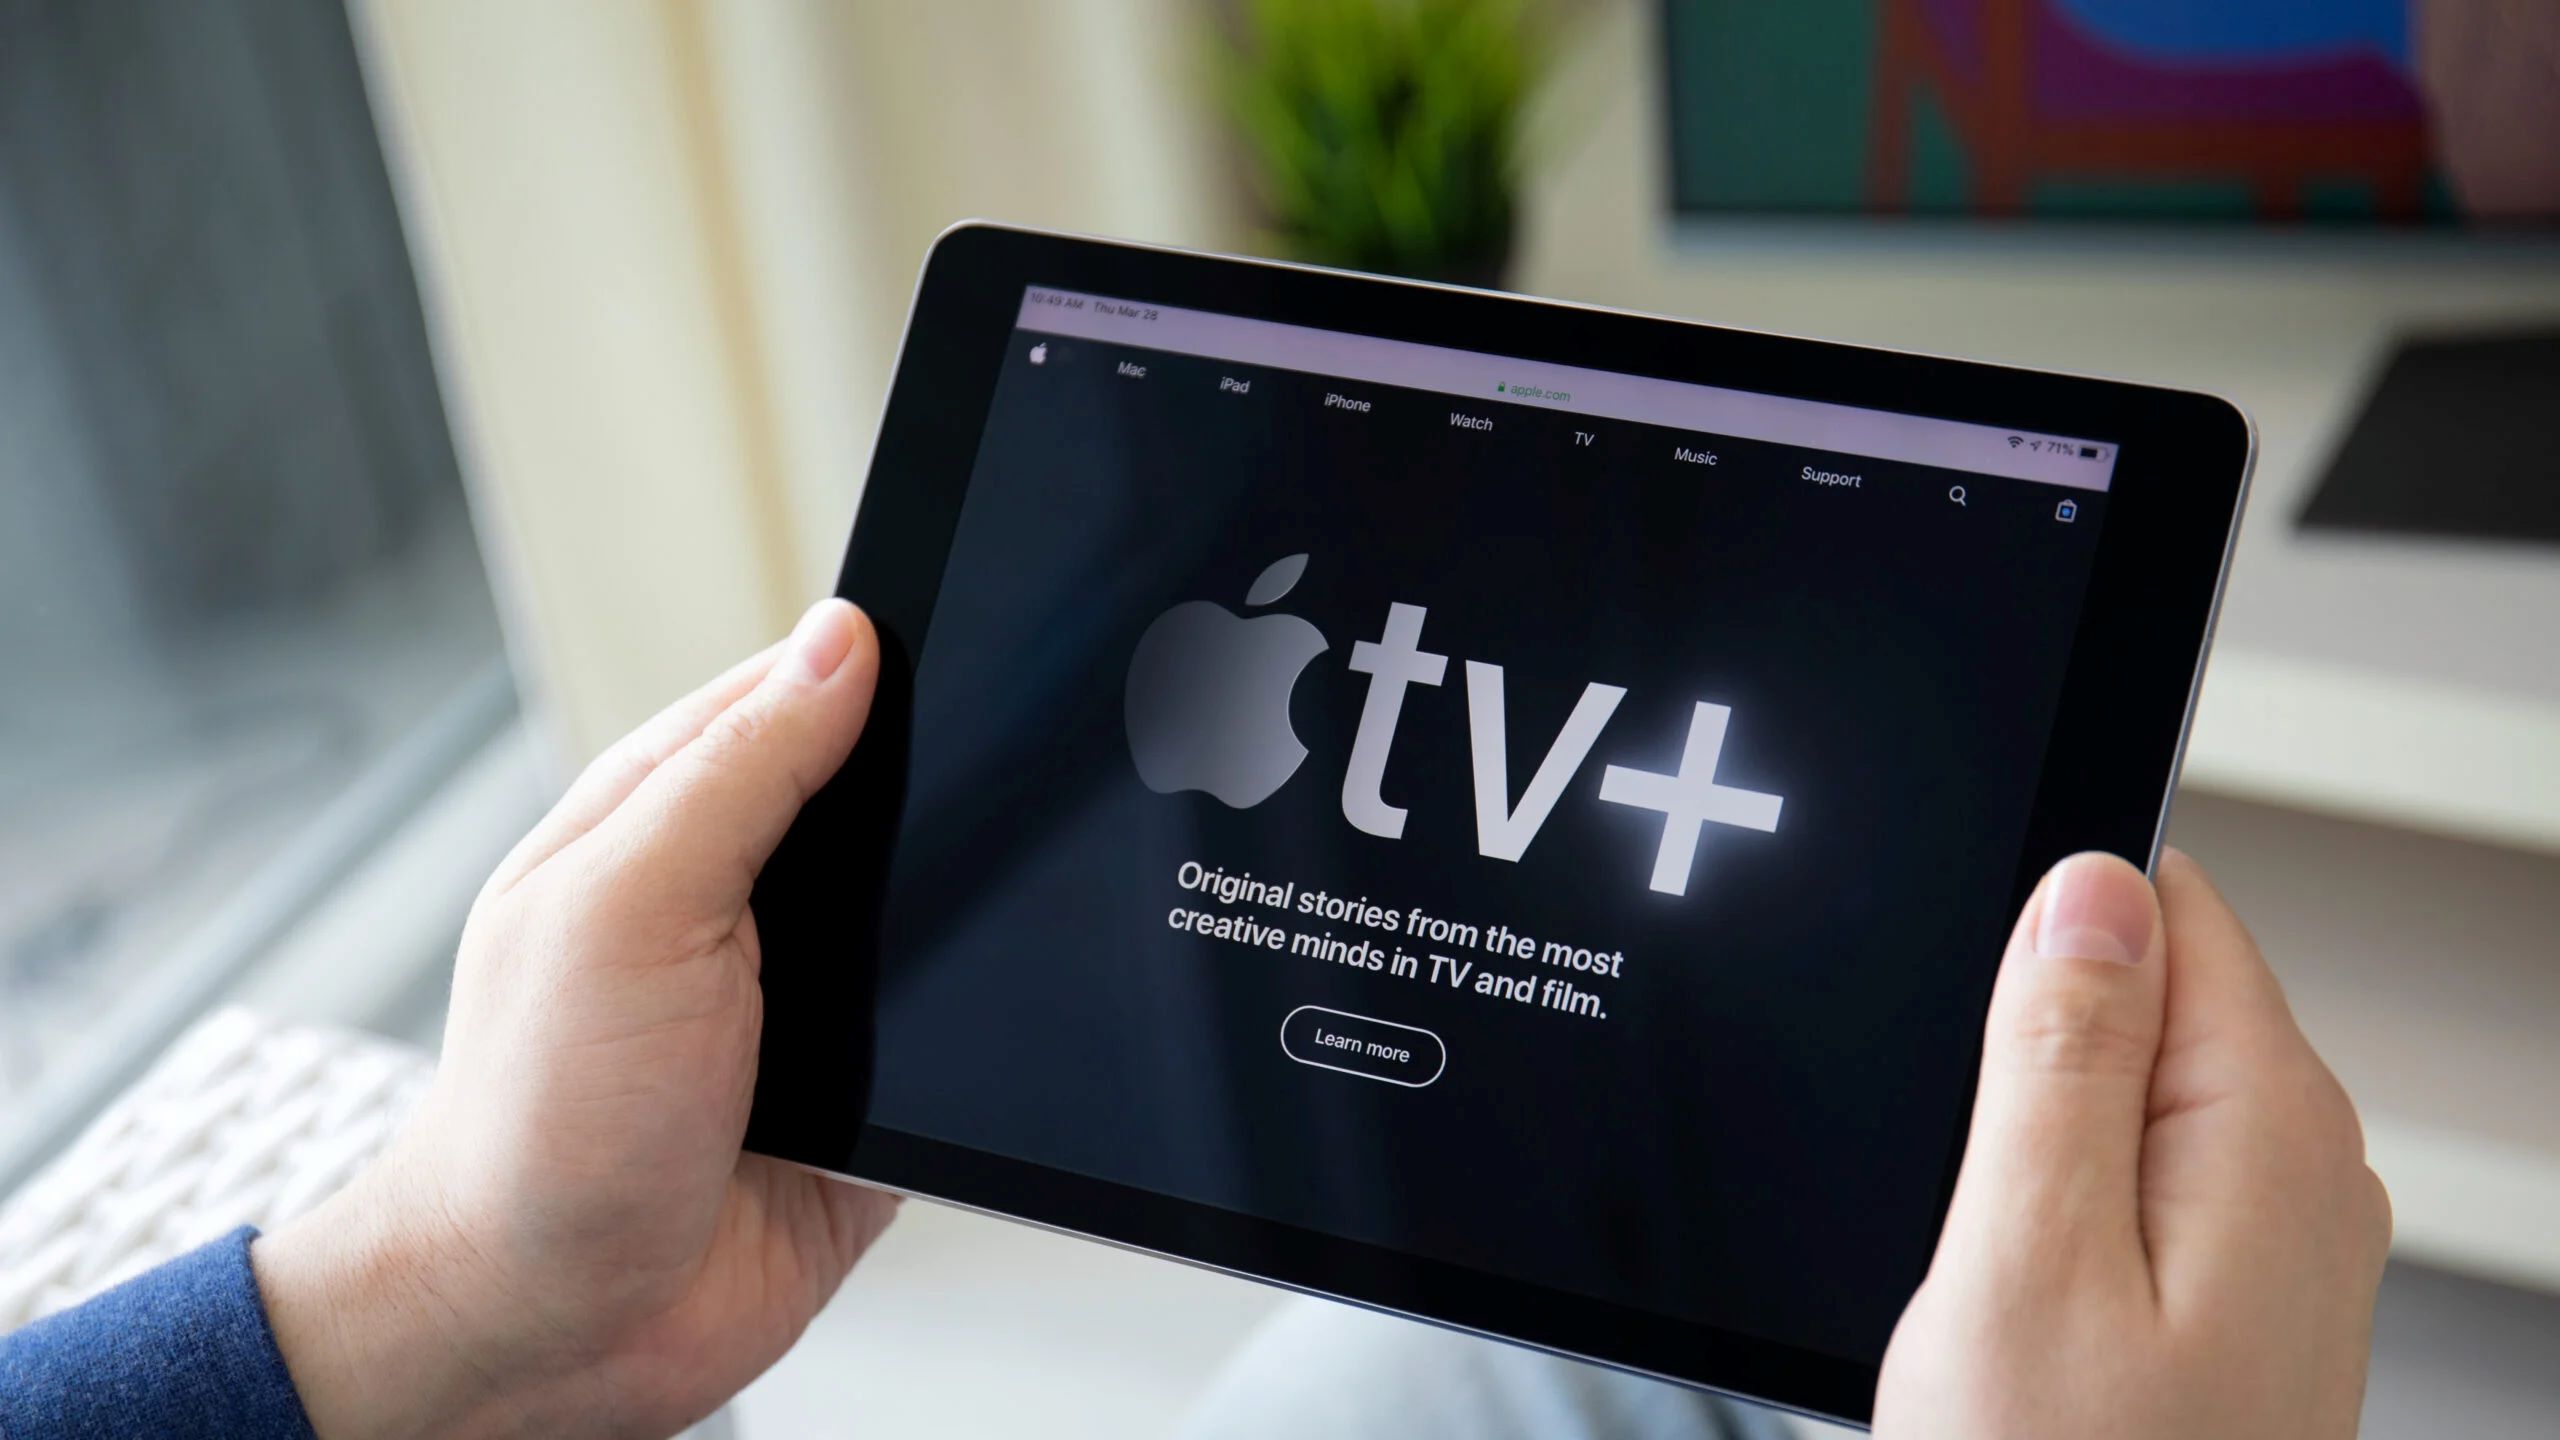 How To Cancel Apple TV+